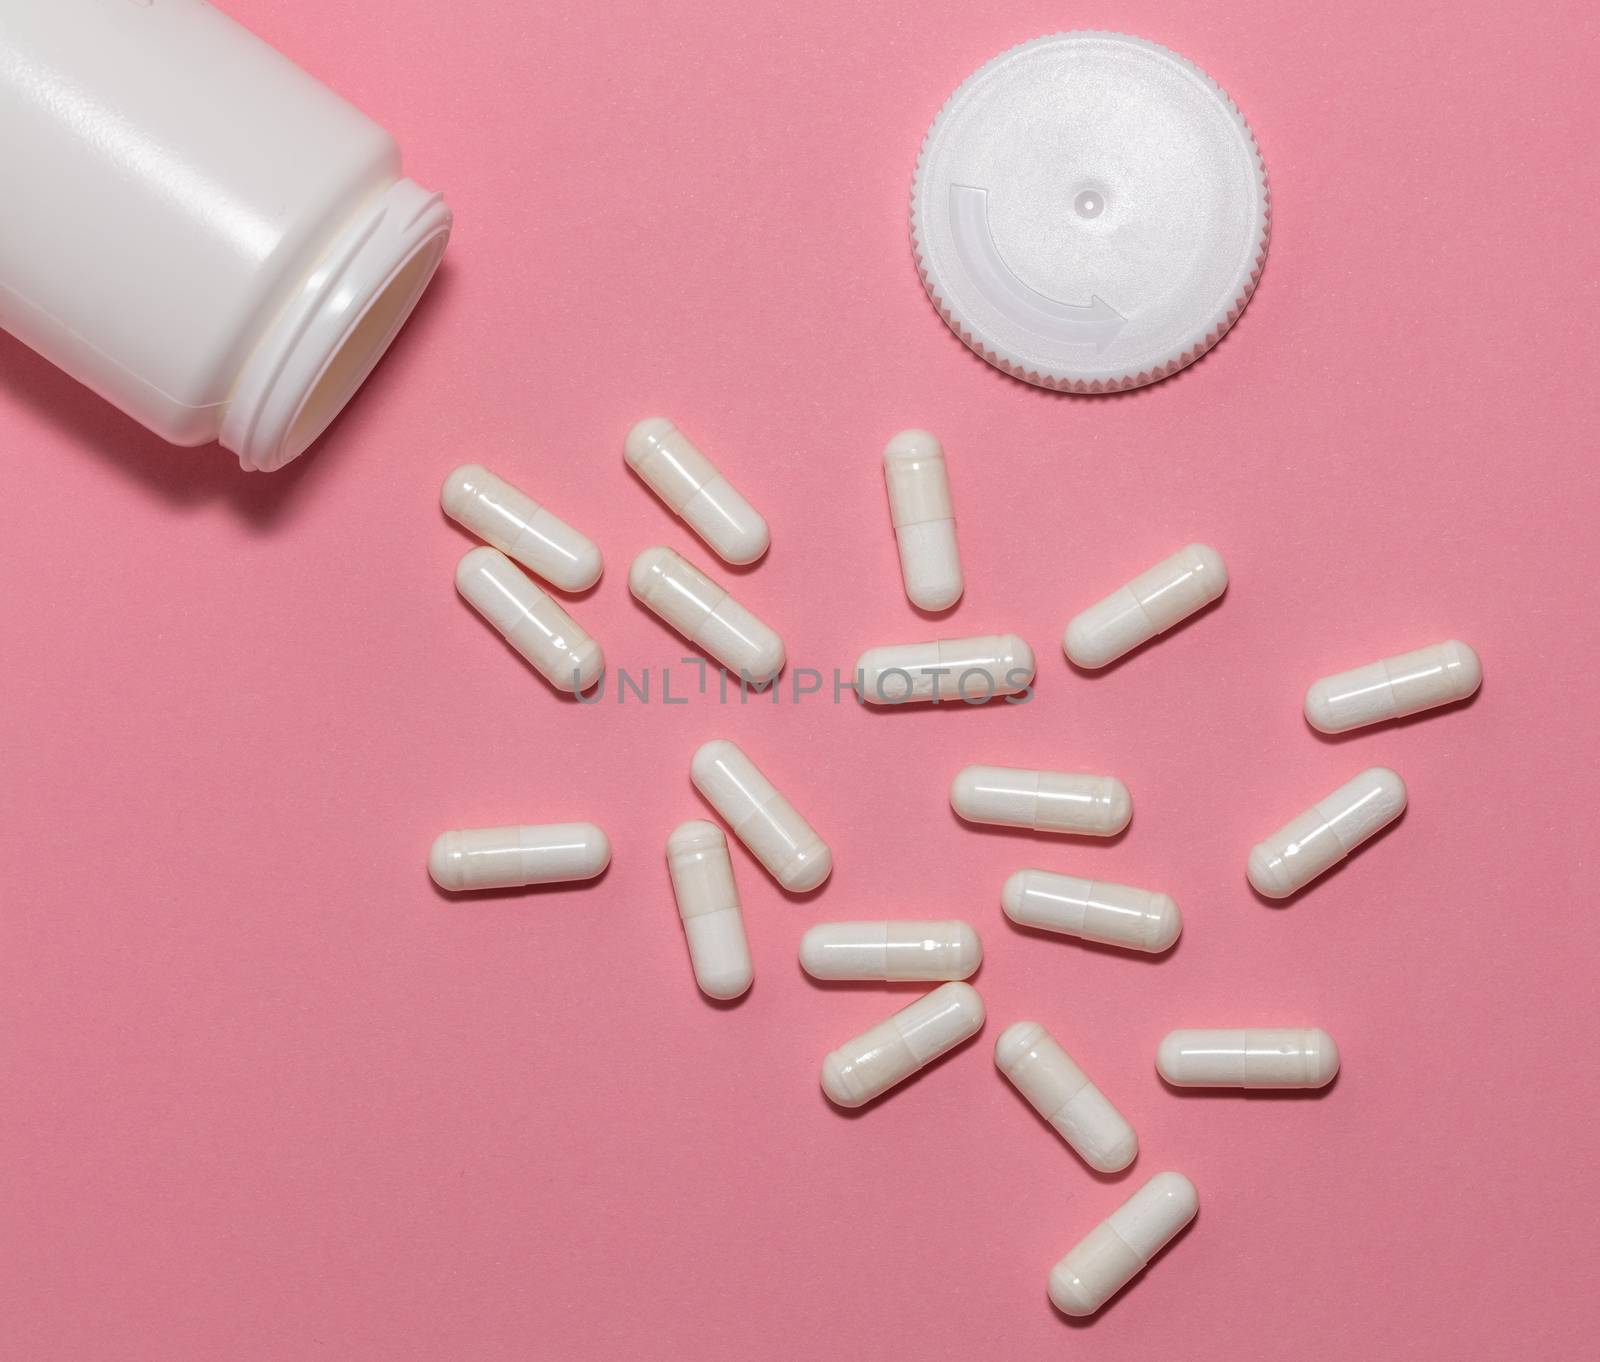 Top view of scattered prescription white pills, container, cap on pink background. White container and white pills scattered on pastel pink background. Healthcare, medical and pharmaceutical concept.